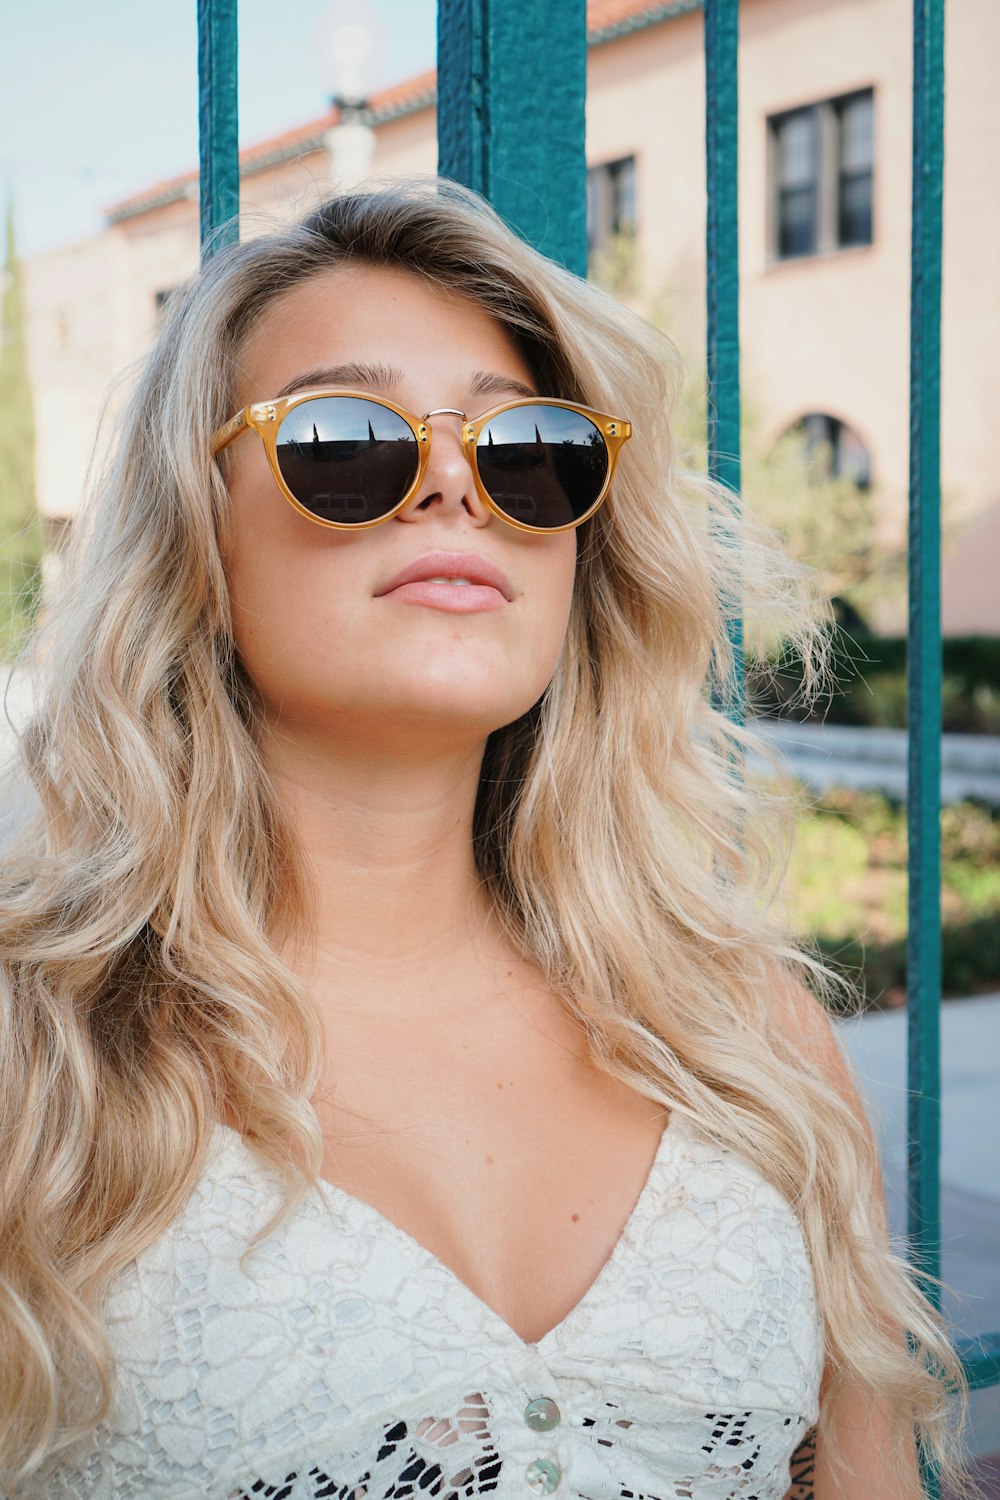 30k+ Girl With Sunglasses Pictures | Download Free Images on Unsplash